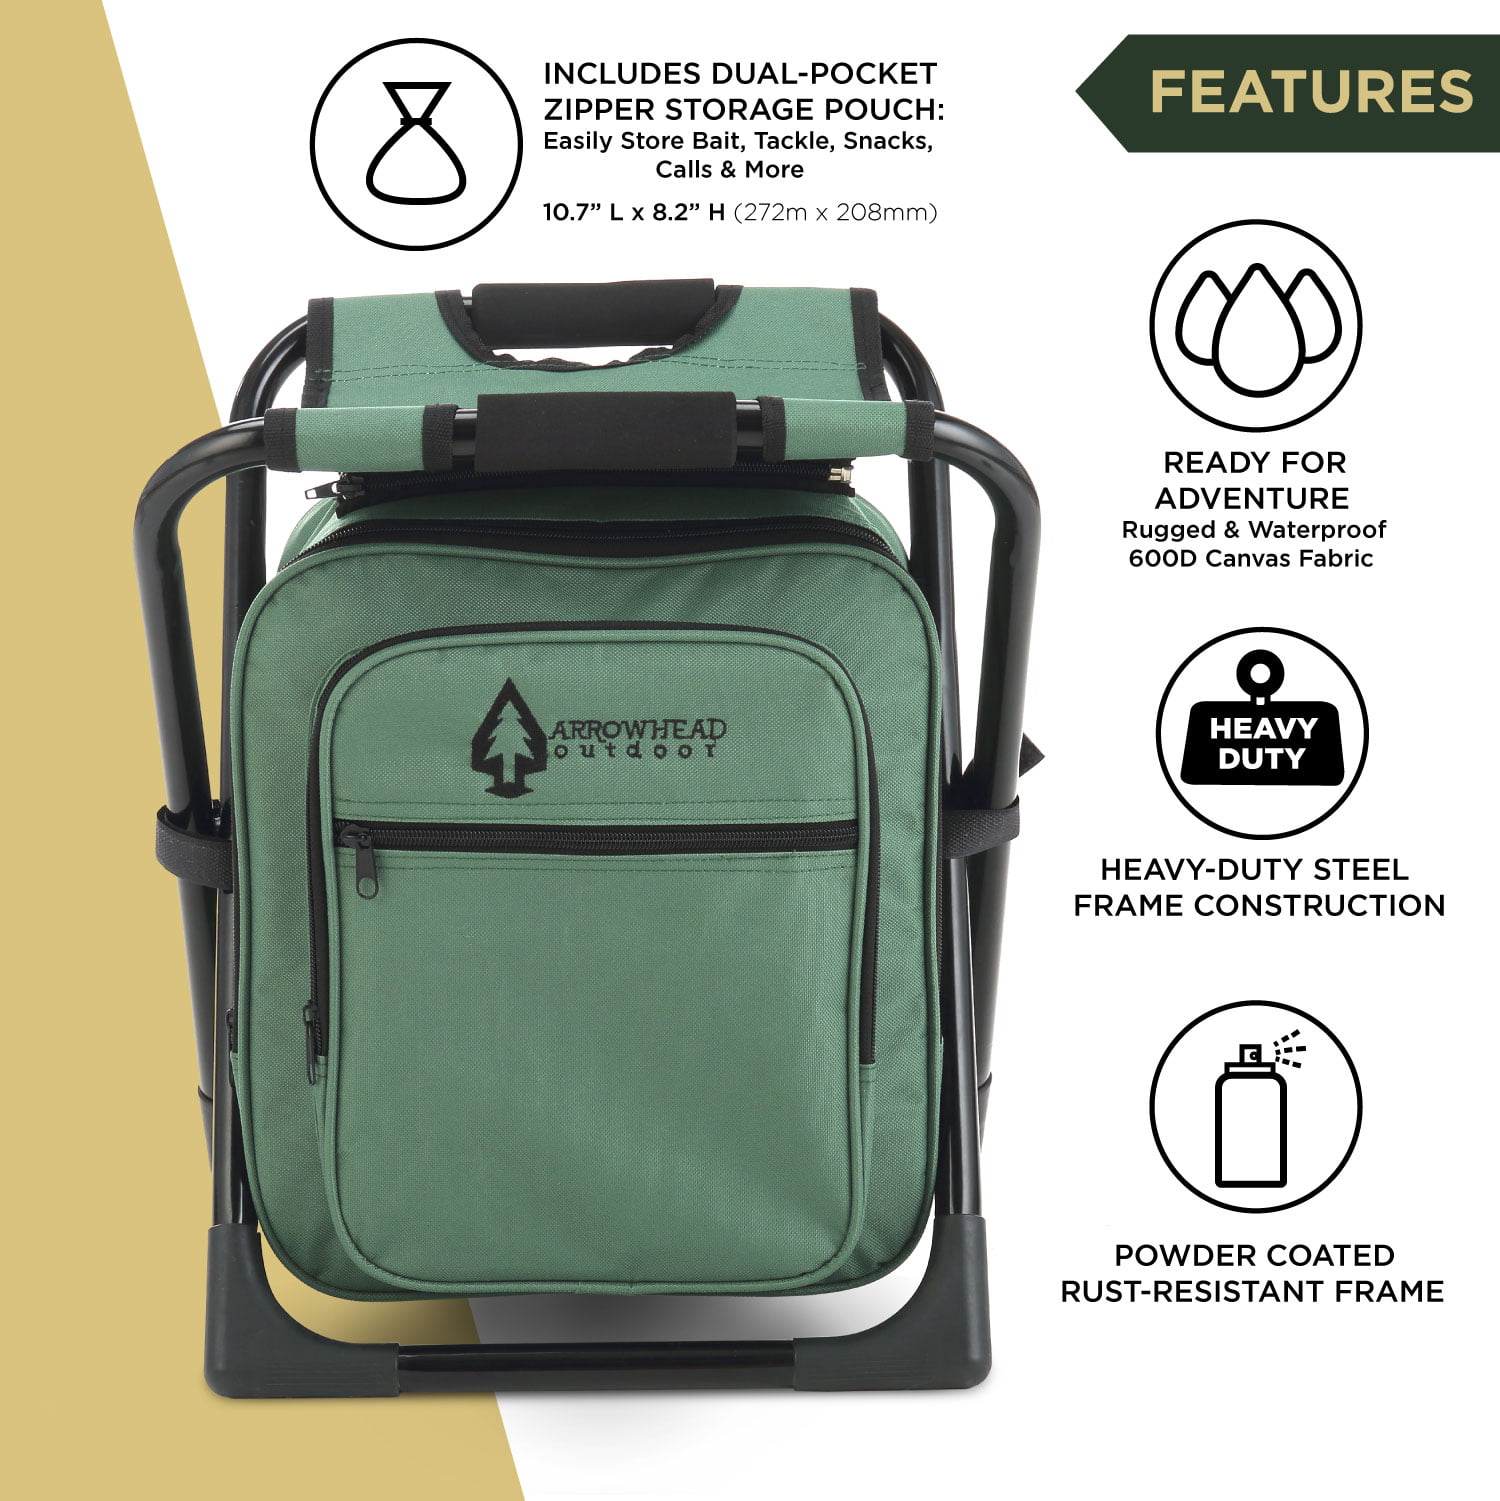 ARROWHEAD OUTDOOR Multi-Function 3-in-1 Compact Camp Chair: Backpack, Stool  & Insulated Cooler, w/ External Pockets, Lightweight, Backpack, Storage Bag  Included, Fishing, Hiking, Heavy-Duty, USA-Based 